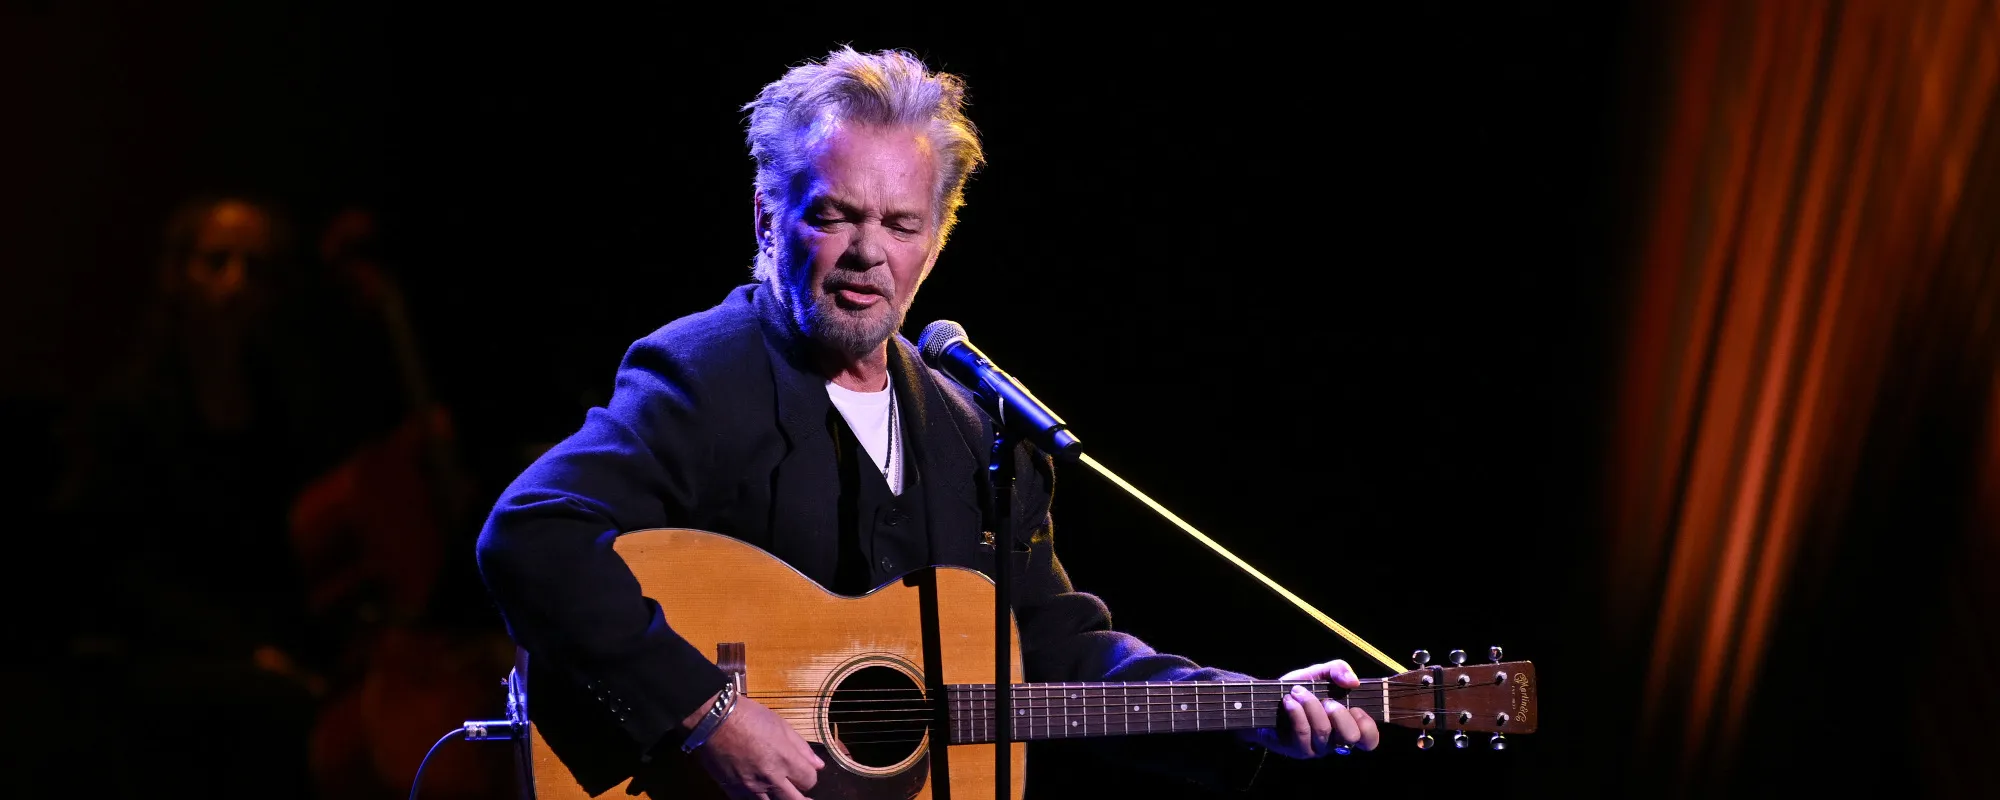 Just Need One More Hit: The Story Behind “Crumblin’ Down” by John Cougar Mellencamp